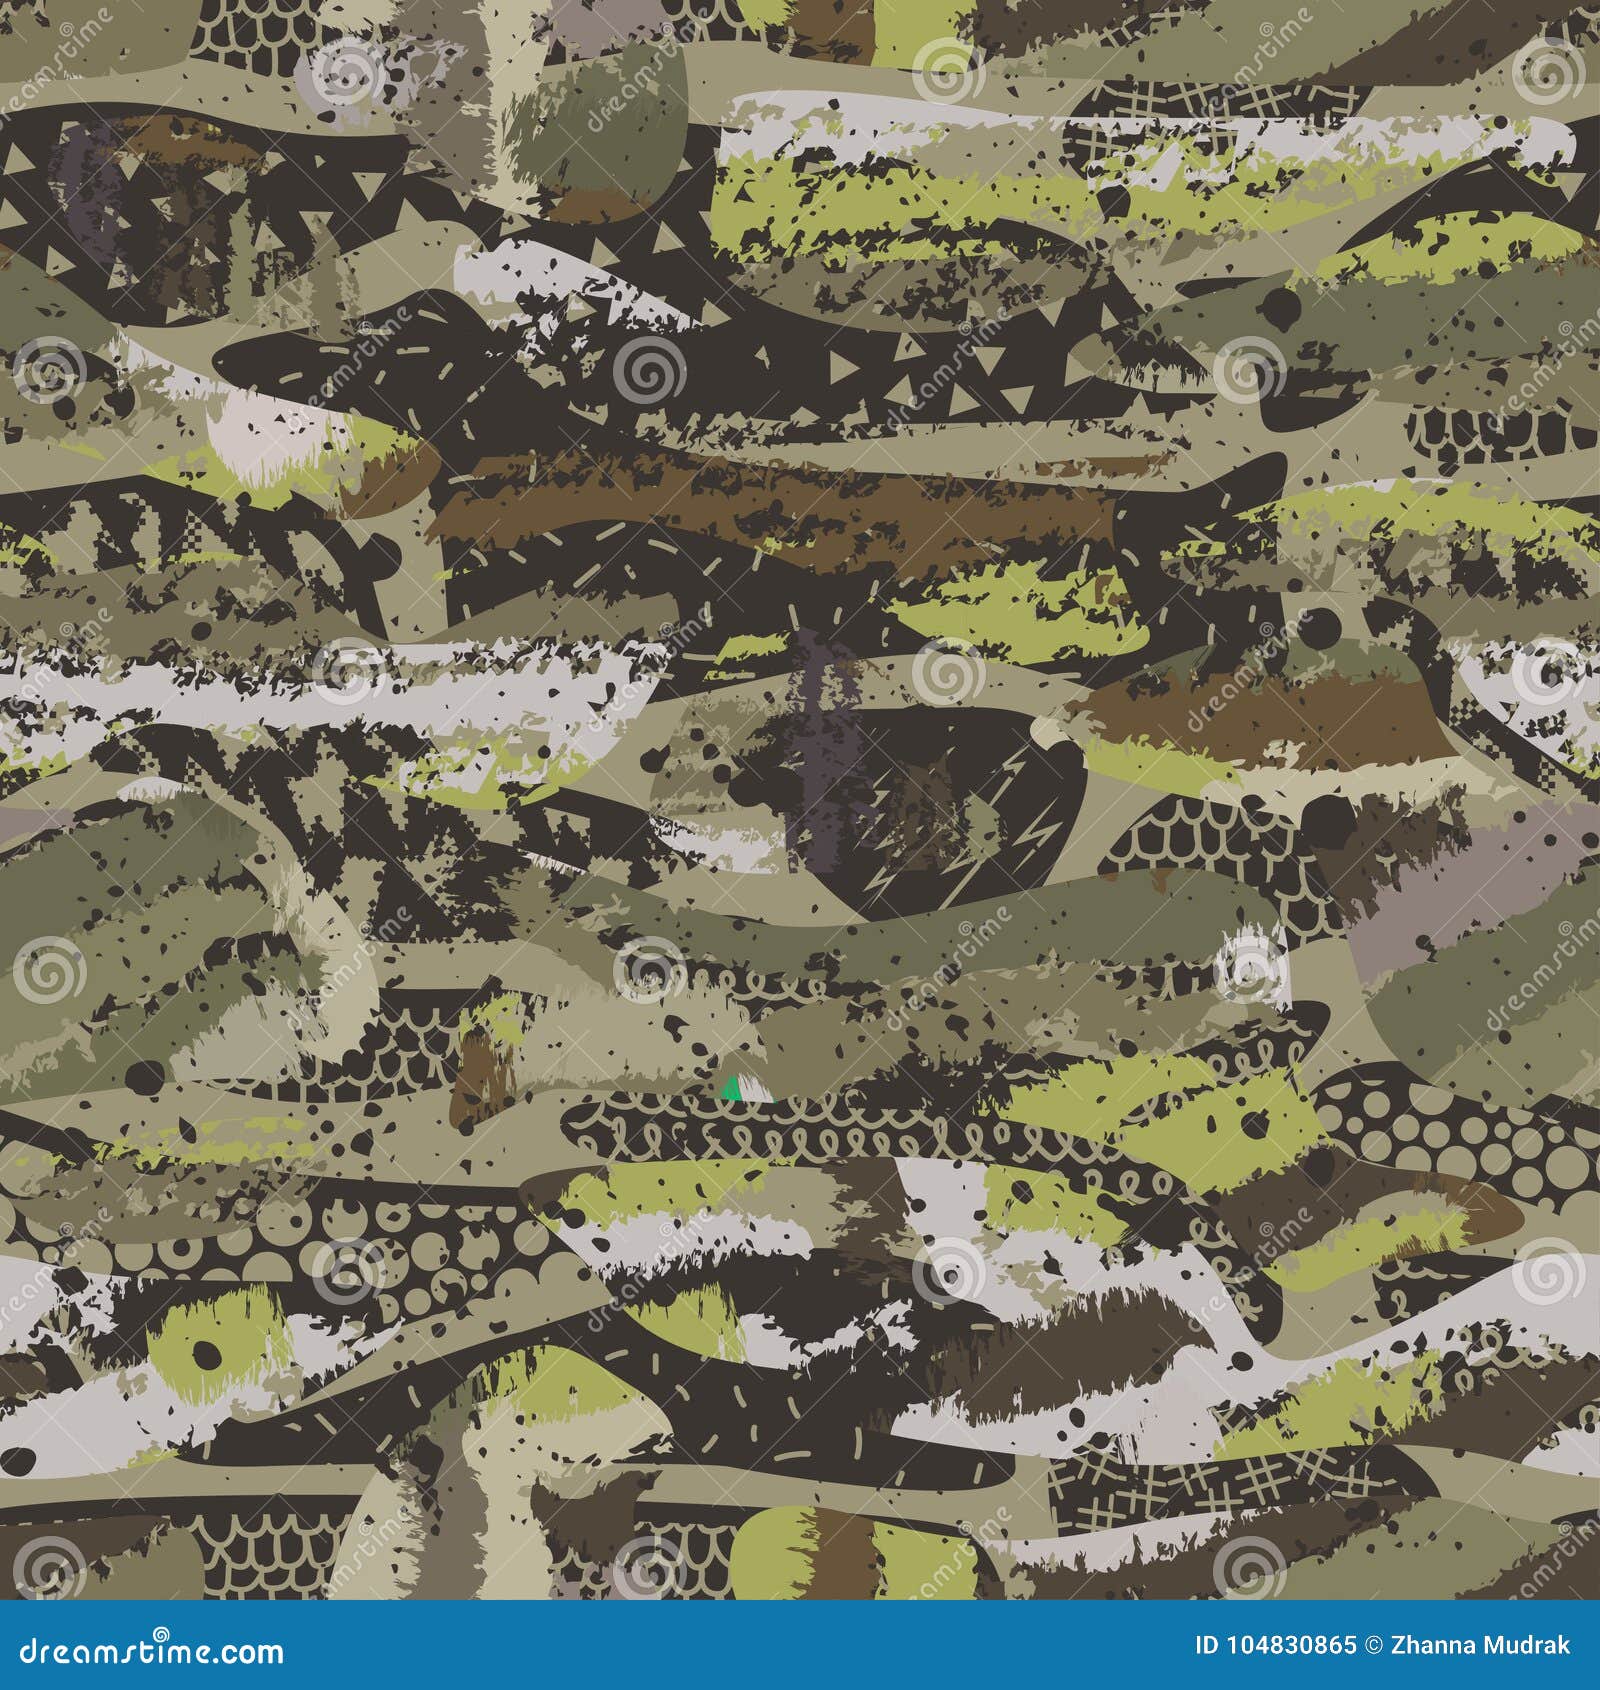 Texture Military Camouflage Seamless Pattern Abstract Army And